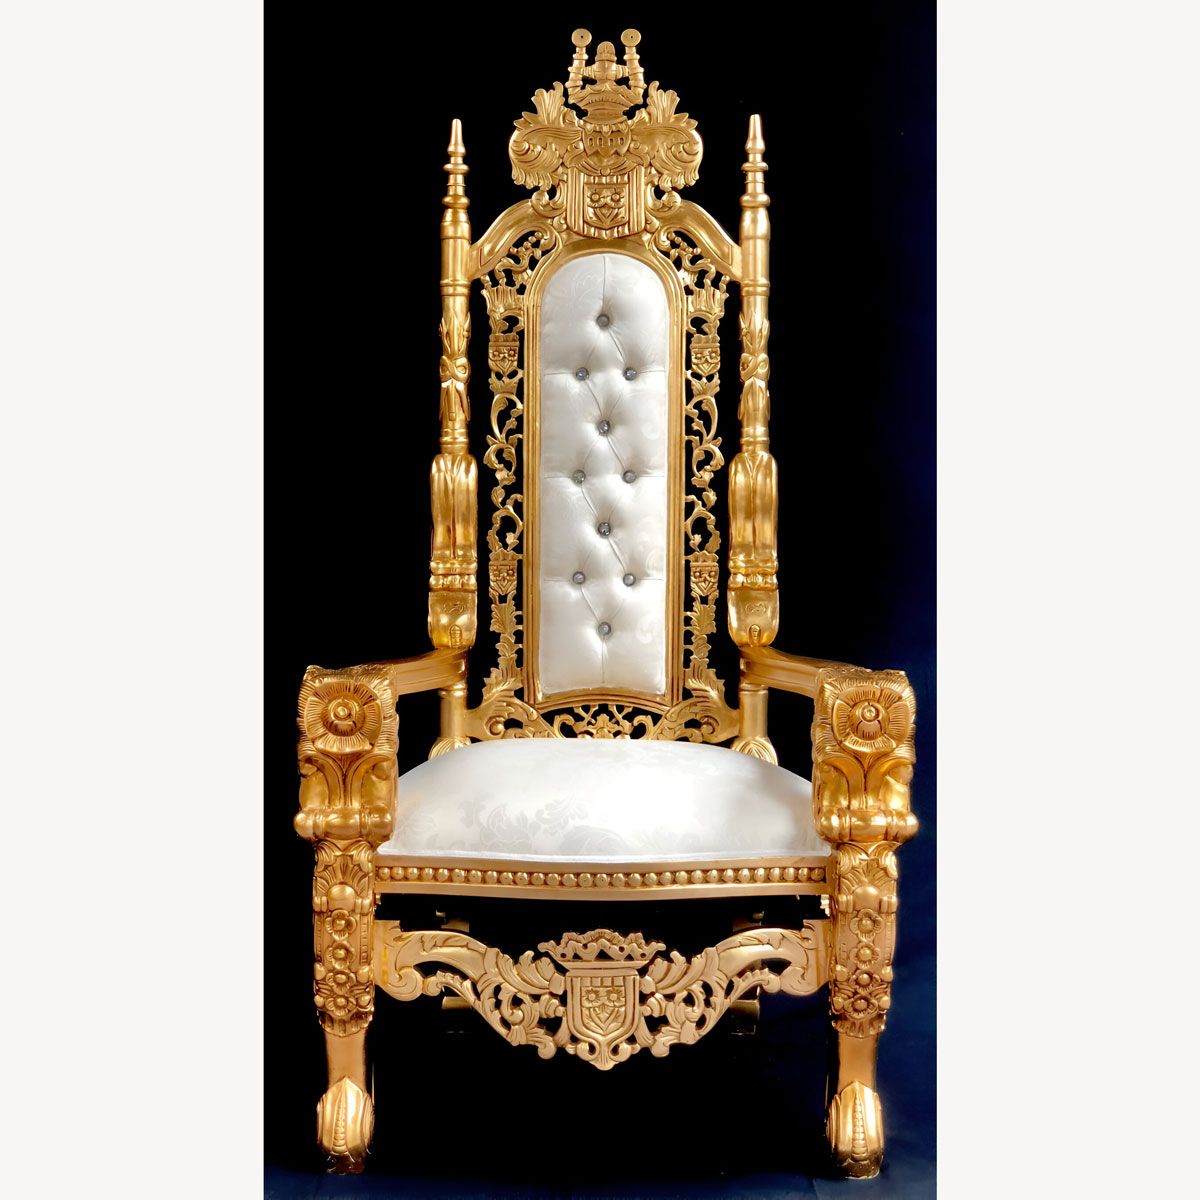 Beautiful Gold Large Flower Rose Carved Throne Chair In Ivory Cream Damask Fabric And Crystal Buttons 1 - Hampshire Barn Interiors - Beautiful Gold Large Flower Rose Carved Throne Chair In Ivory Cream Damask Fabric And Crystal Buttons -